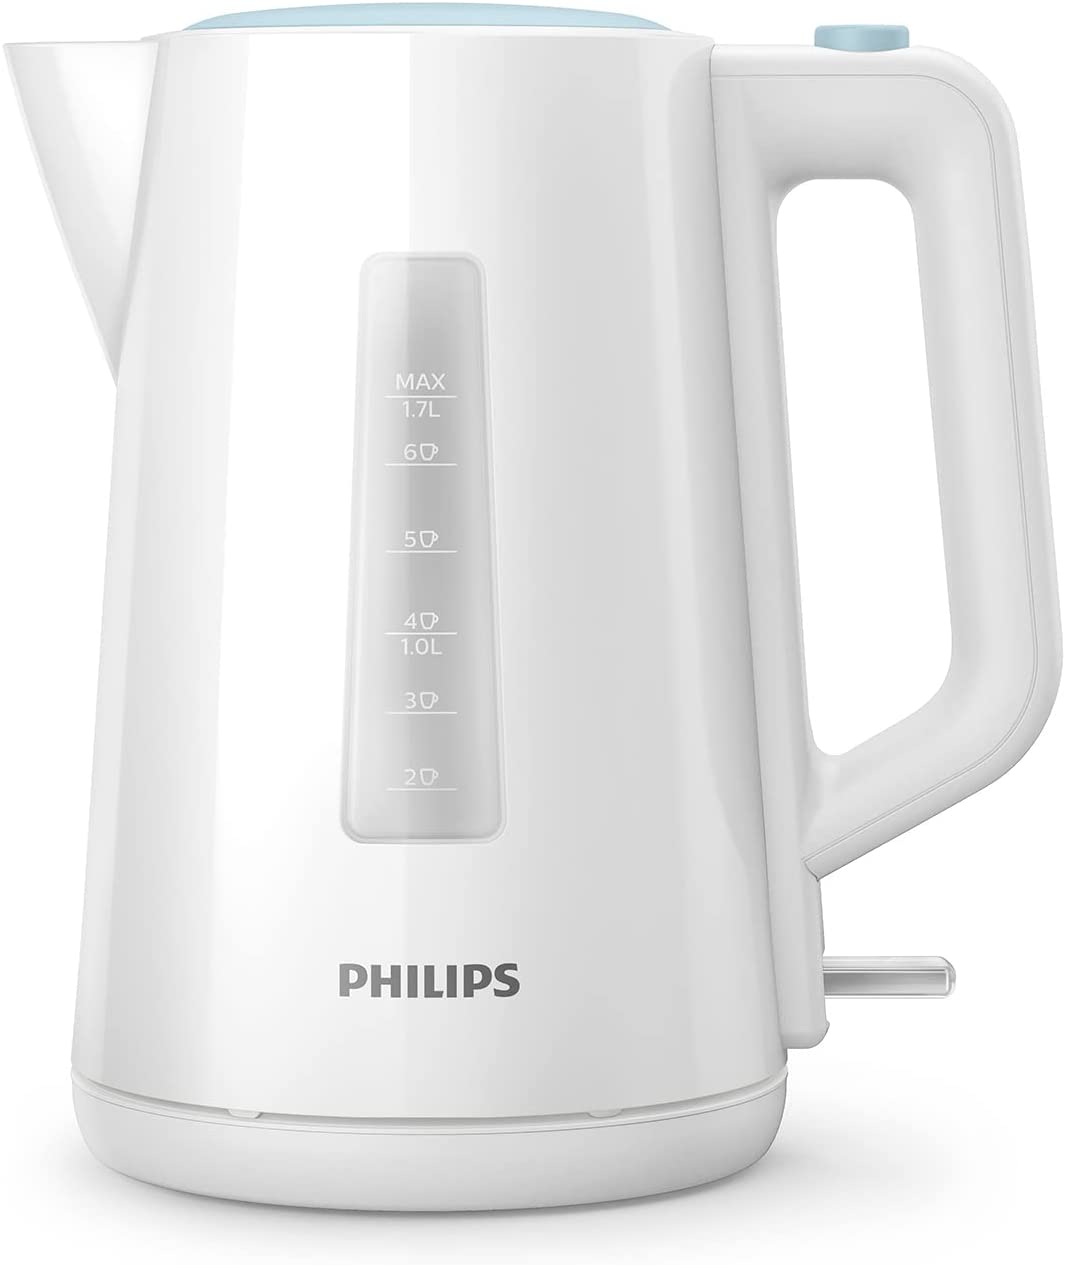 Philips Domestic Appliances Philips HD9318/00 Kettle Series 3000, 1.7 L, LED Indicator, Spring Cover, White